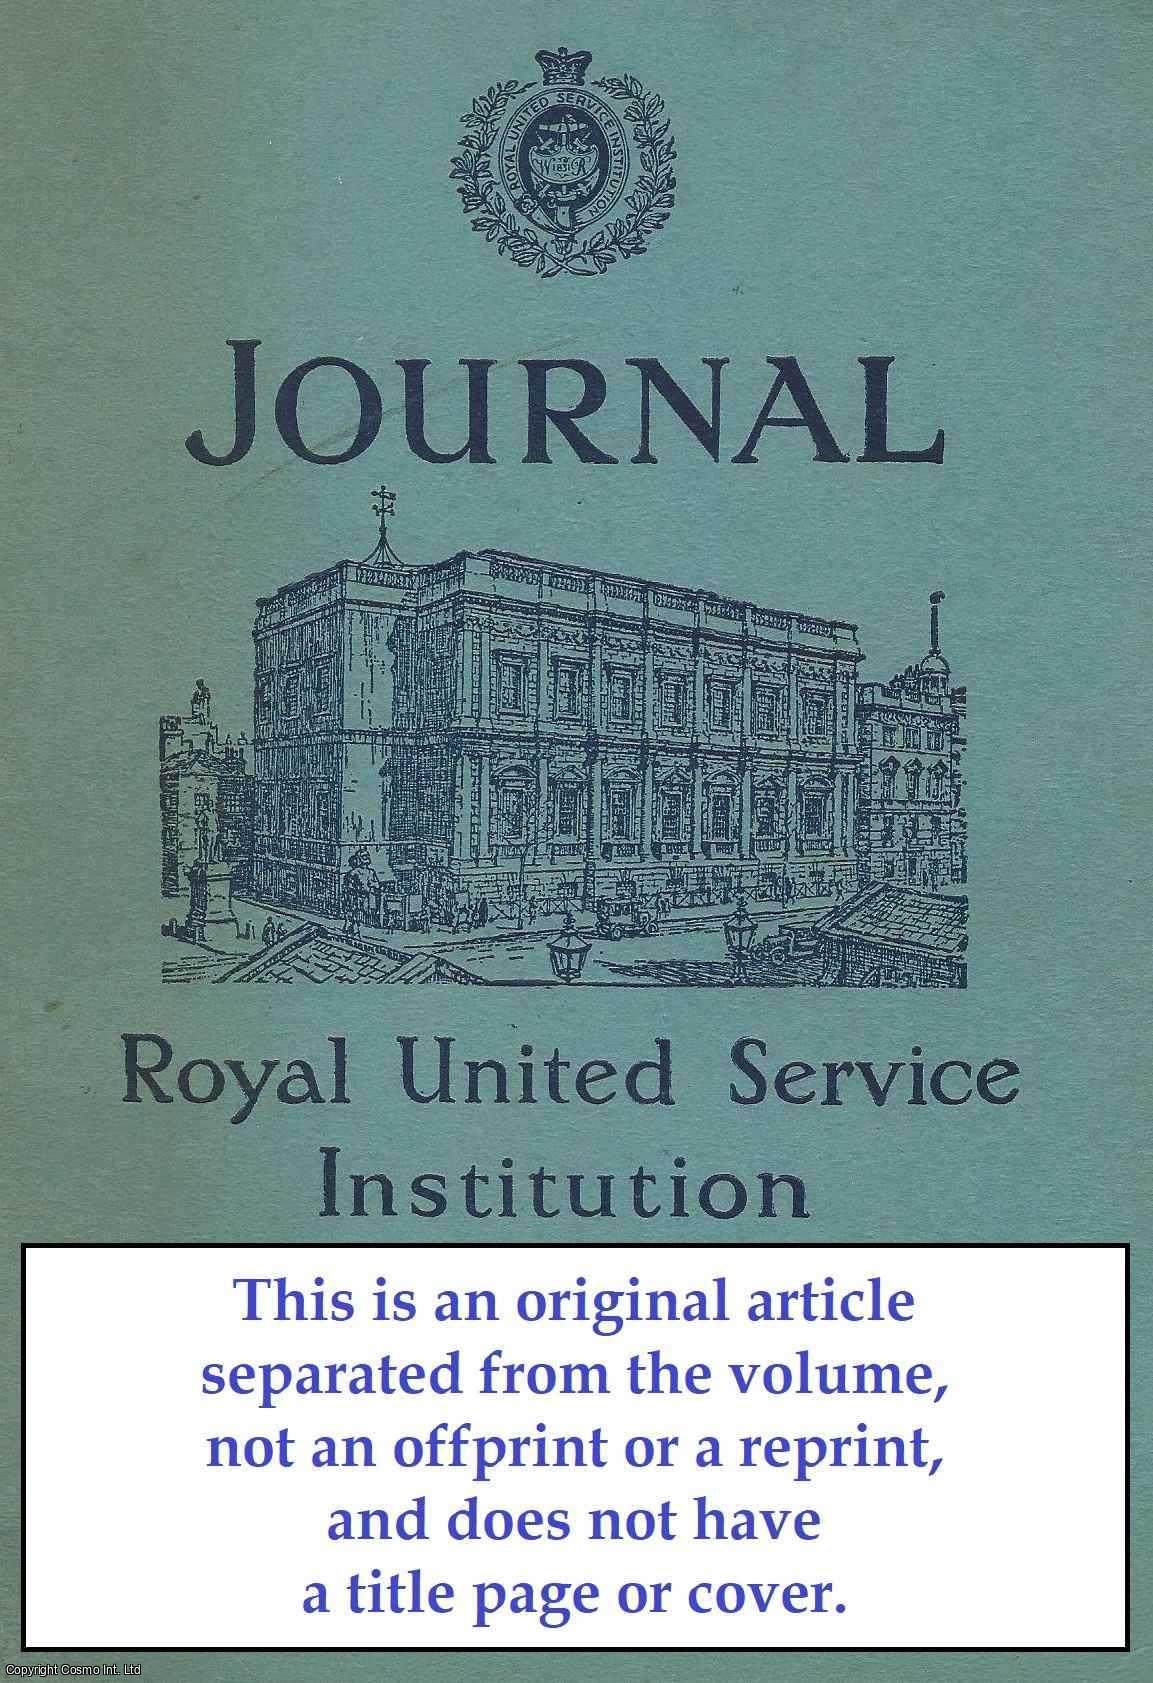 John J. Clark - Anglo-German Naval Negotiations, 1898 to 1914 and 1933 to 1938. An original article from The Royal United Service Institution Journal, 1963.